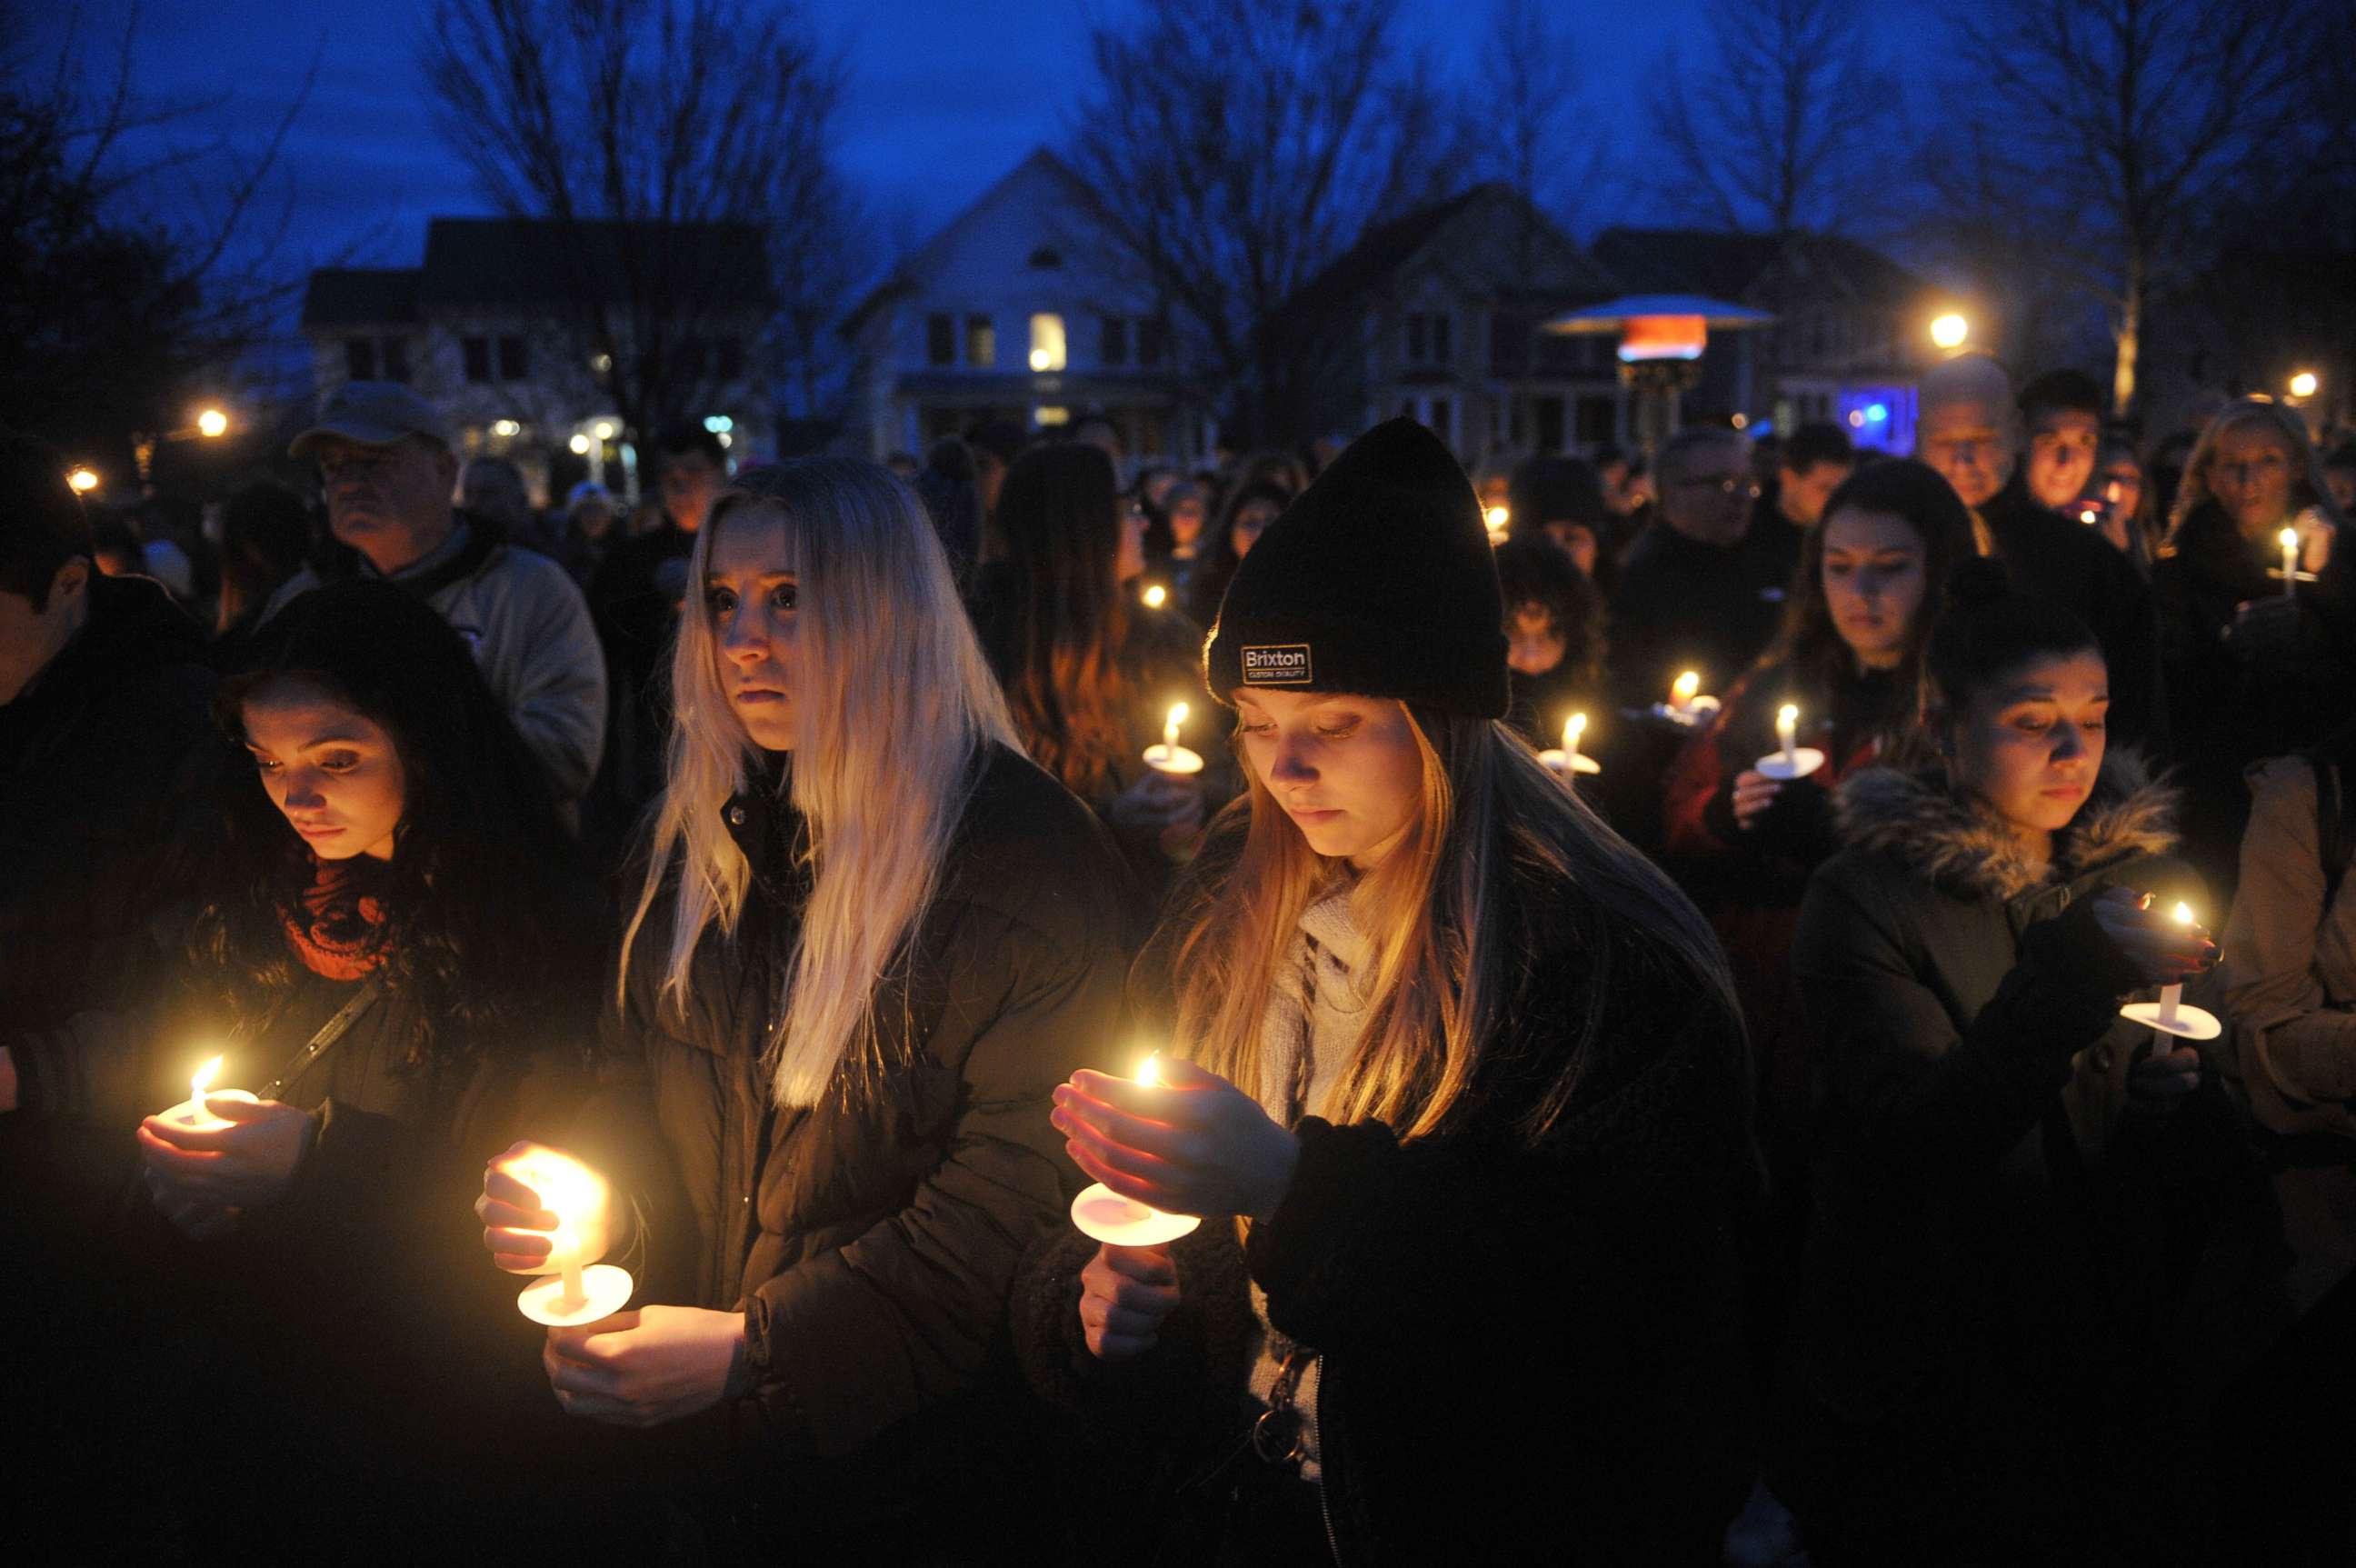 PHOTO: People attend a candlelight vigil for slain college student Samantha Josephson in Robbinsville, N.J., April 2, 2019.